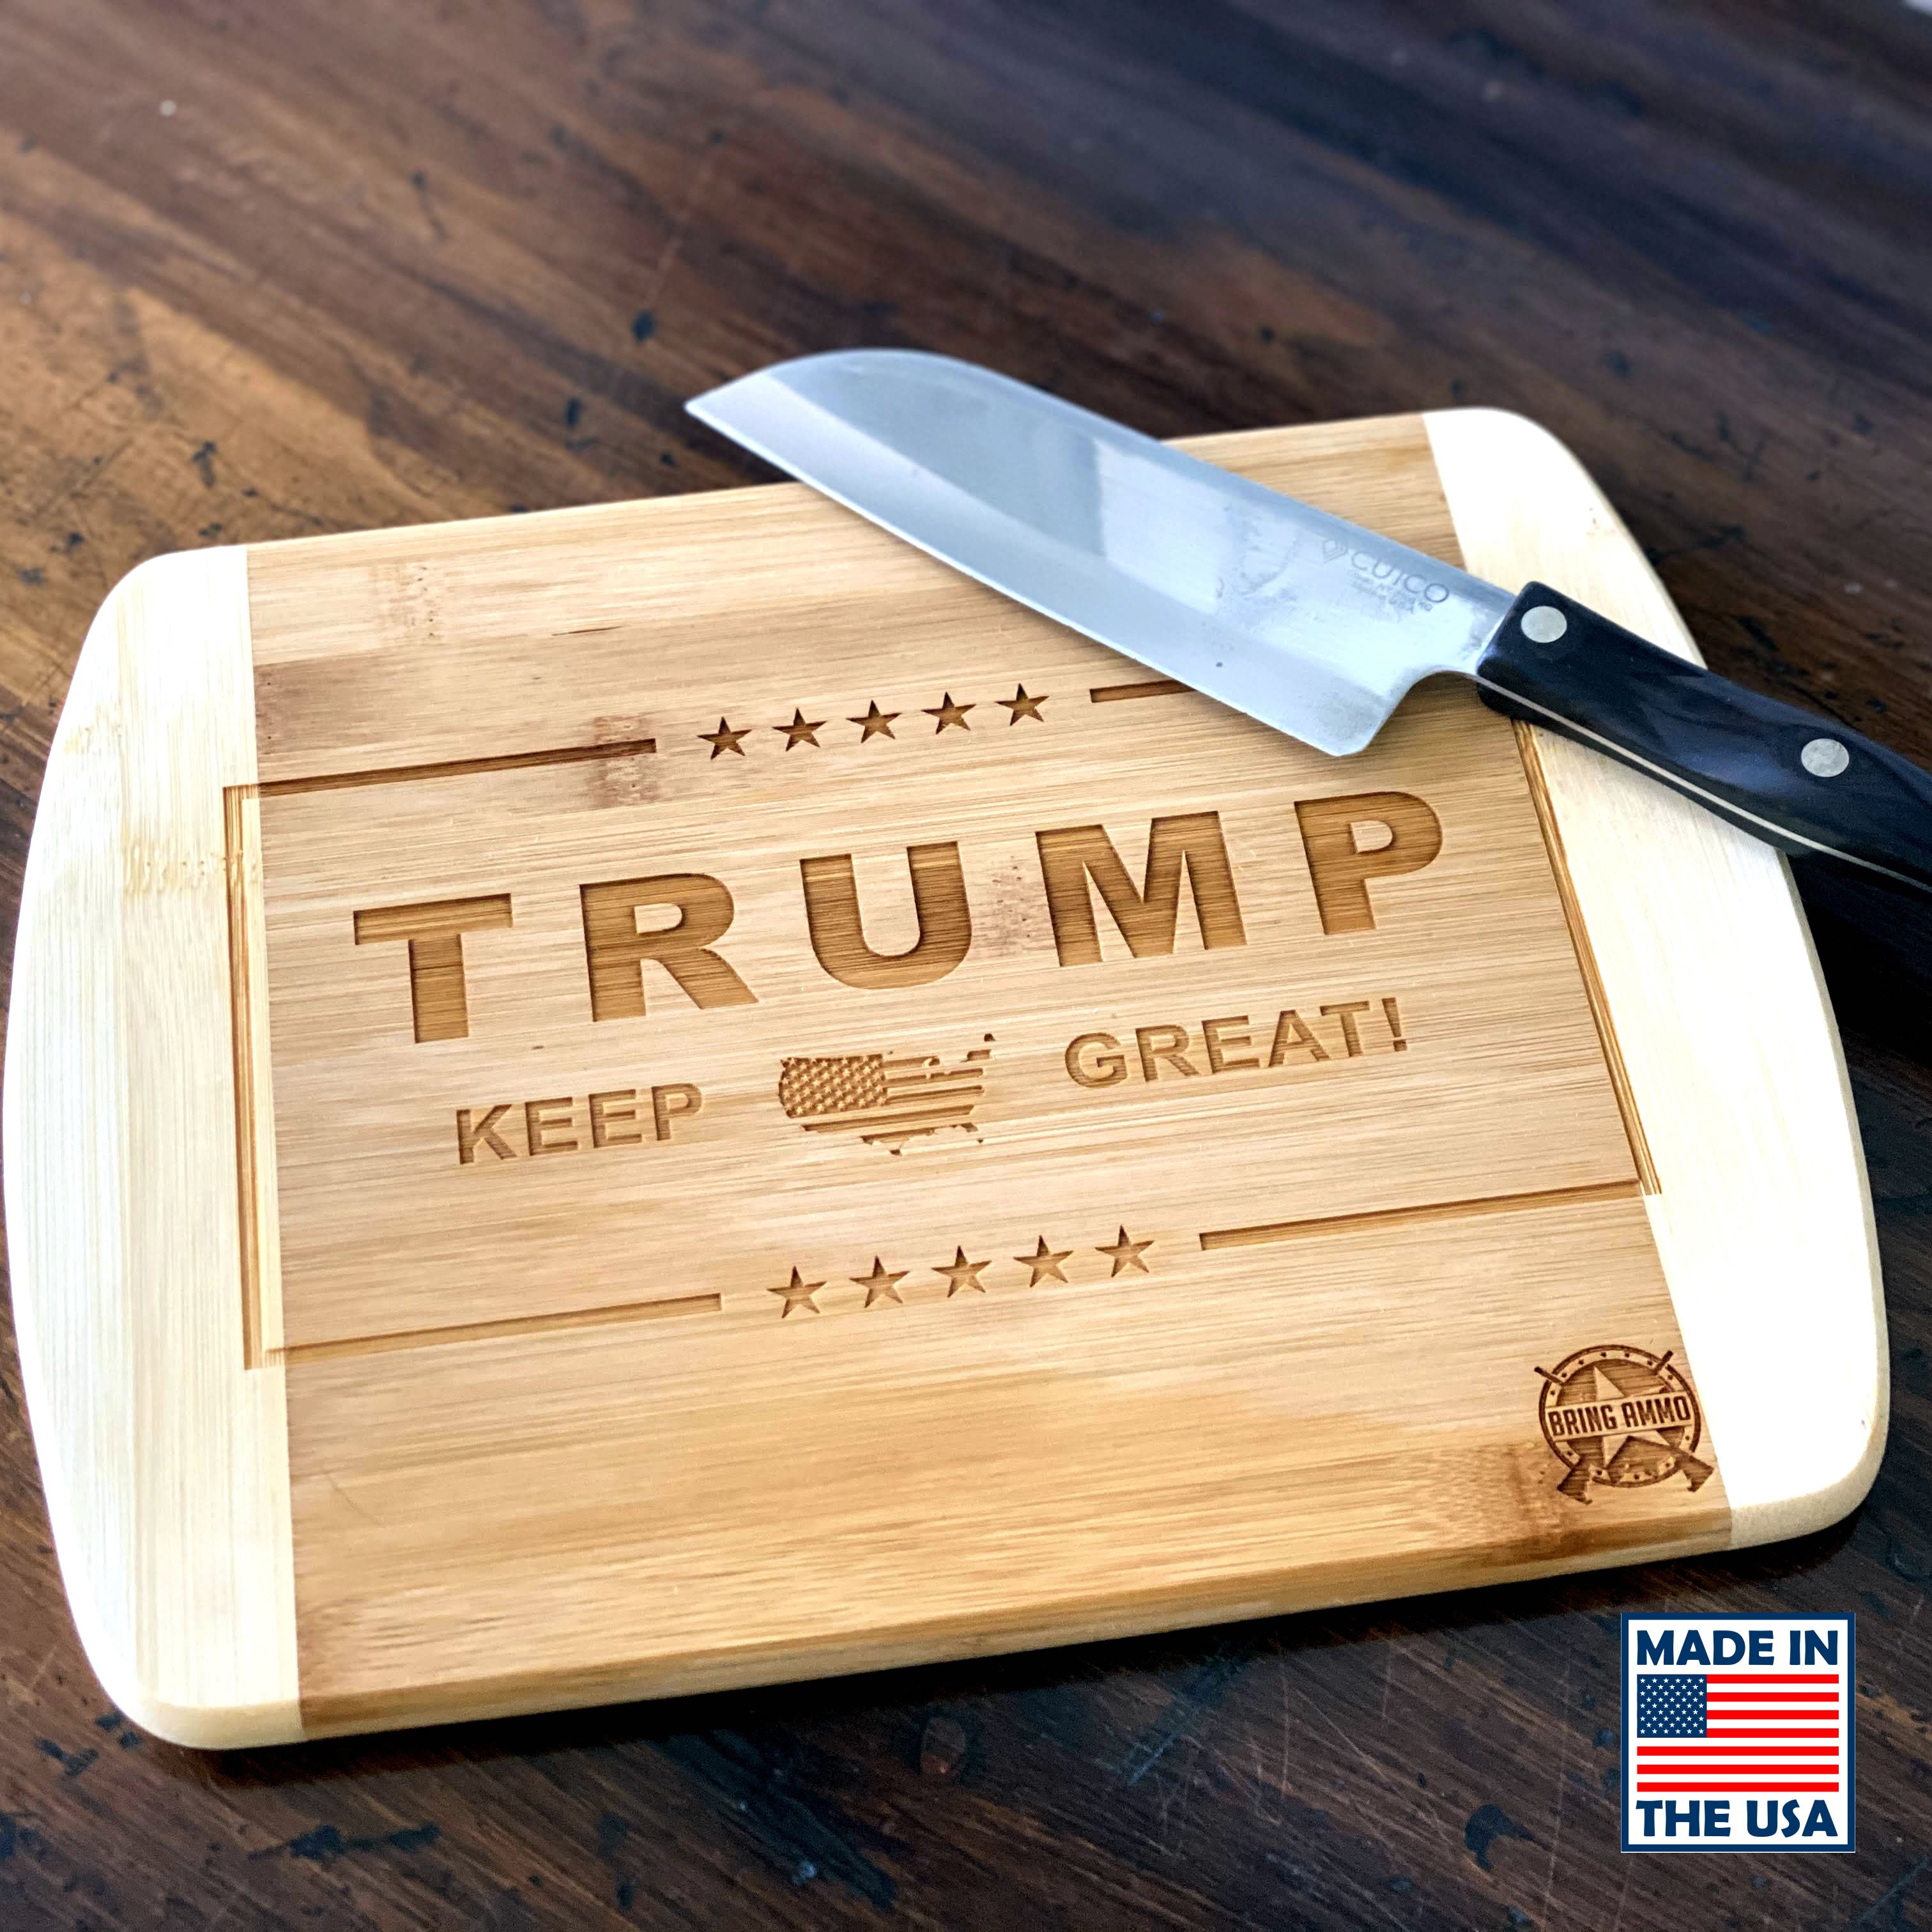 Trump Laser Engraved Real Bamboo Wood Cutting Board - MADE IN THE USA! Great Gift Idea! Wood Cutting Boards Large - 11" x 8.5" 